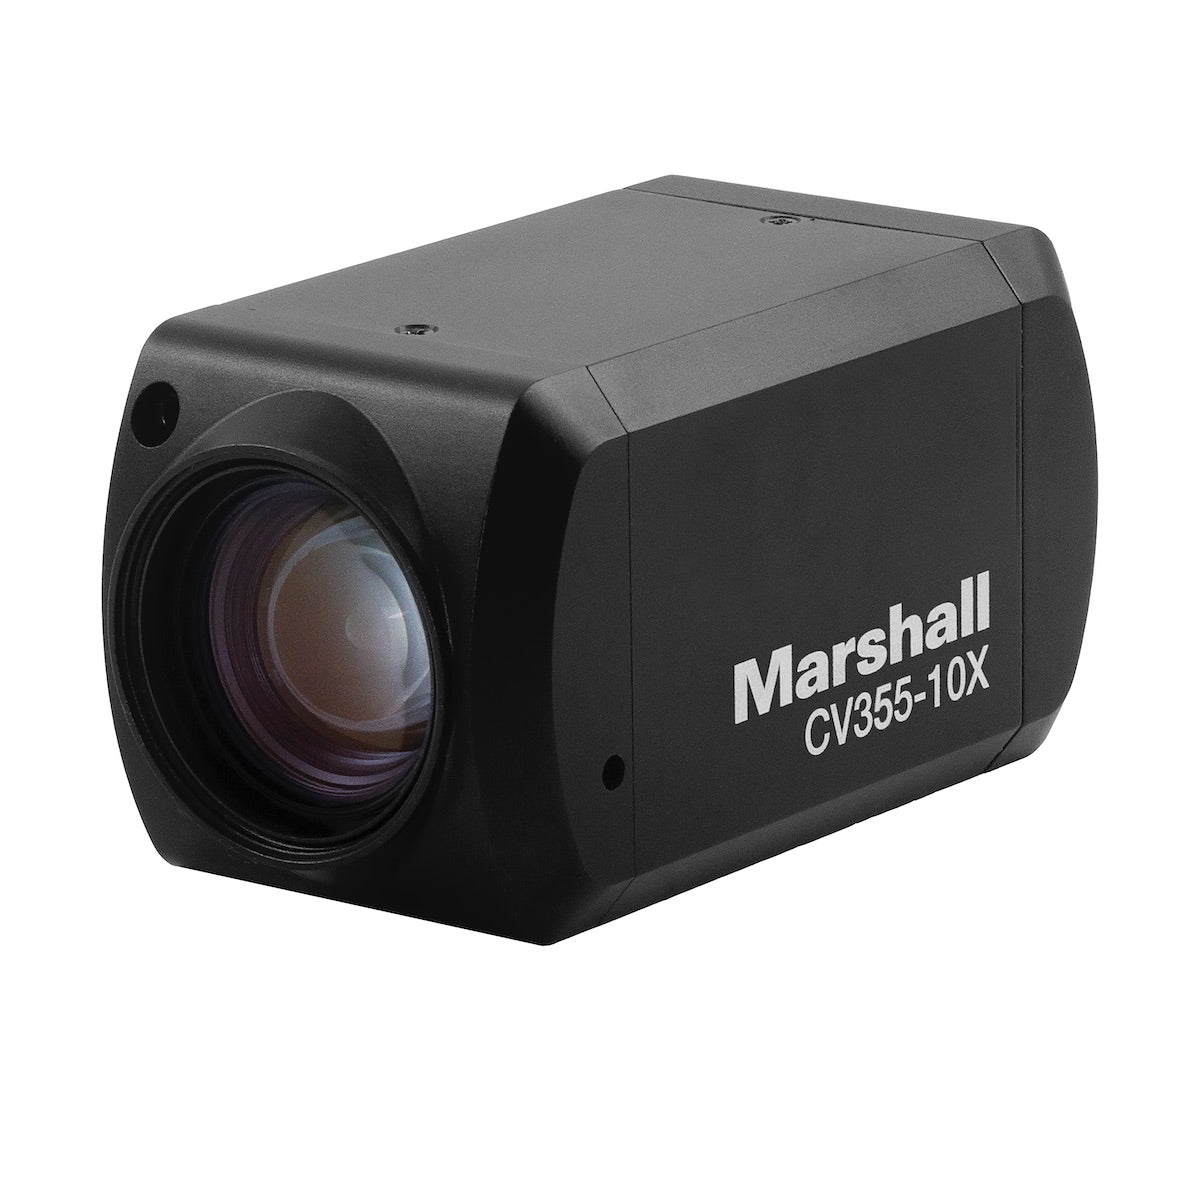 Marshall CV355-10X - Compact HD Video Camera with 3GSDI/HDMI outputs and 10x Optical Zoom, left angled view